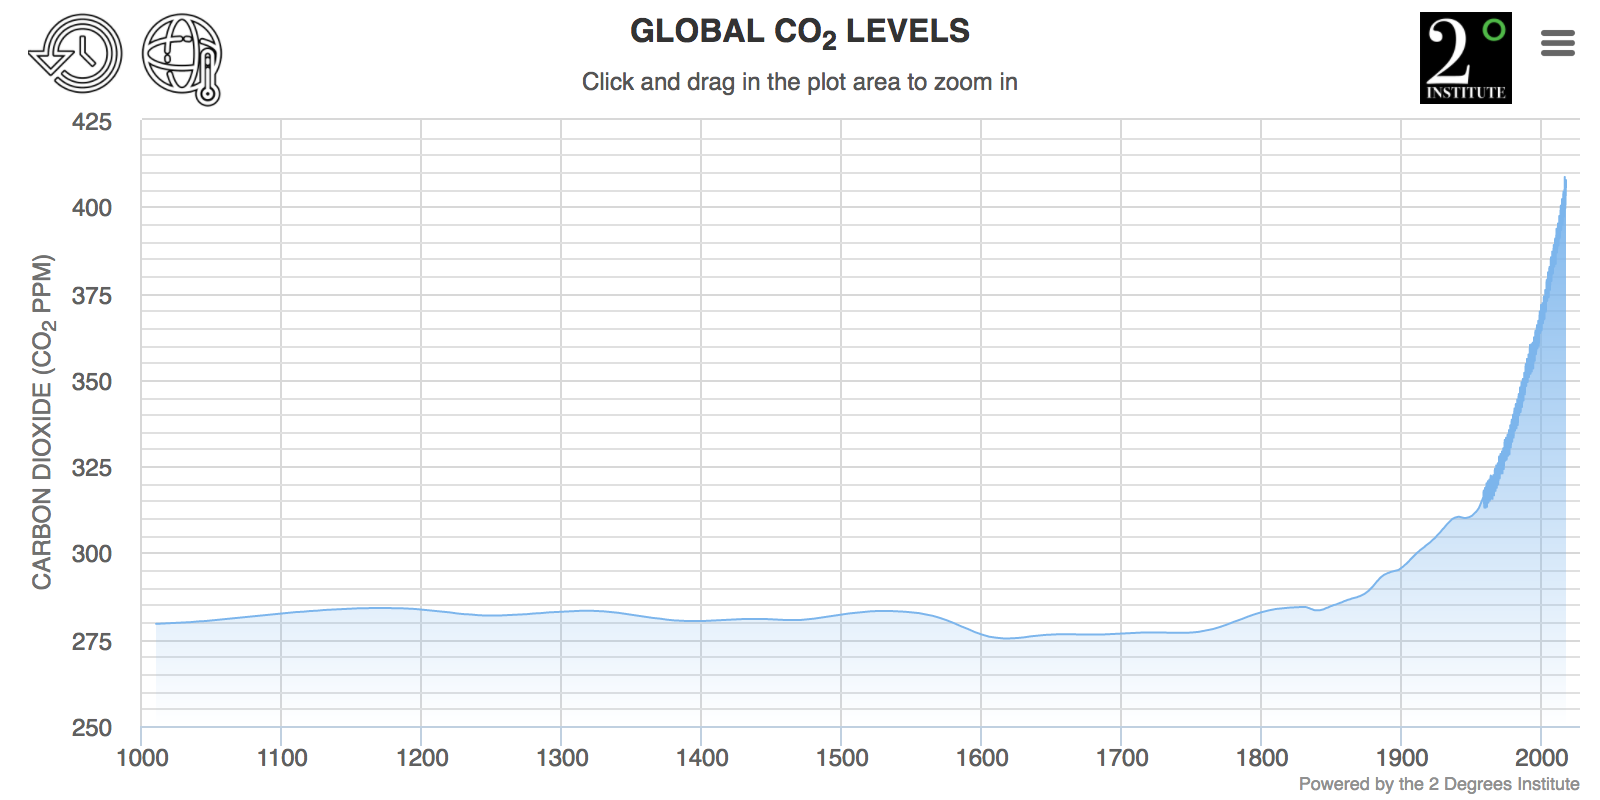 Co2 ppm. Co2 in atmosphere percentage. Changes in Earth temperatures and atmospheric co2 Levels. Global level